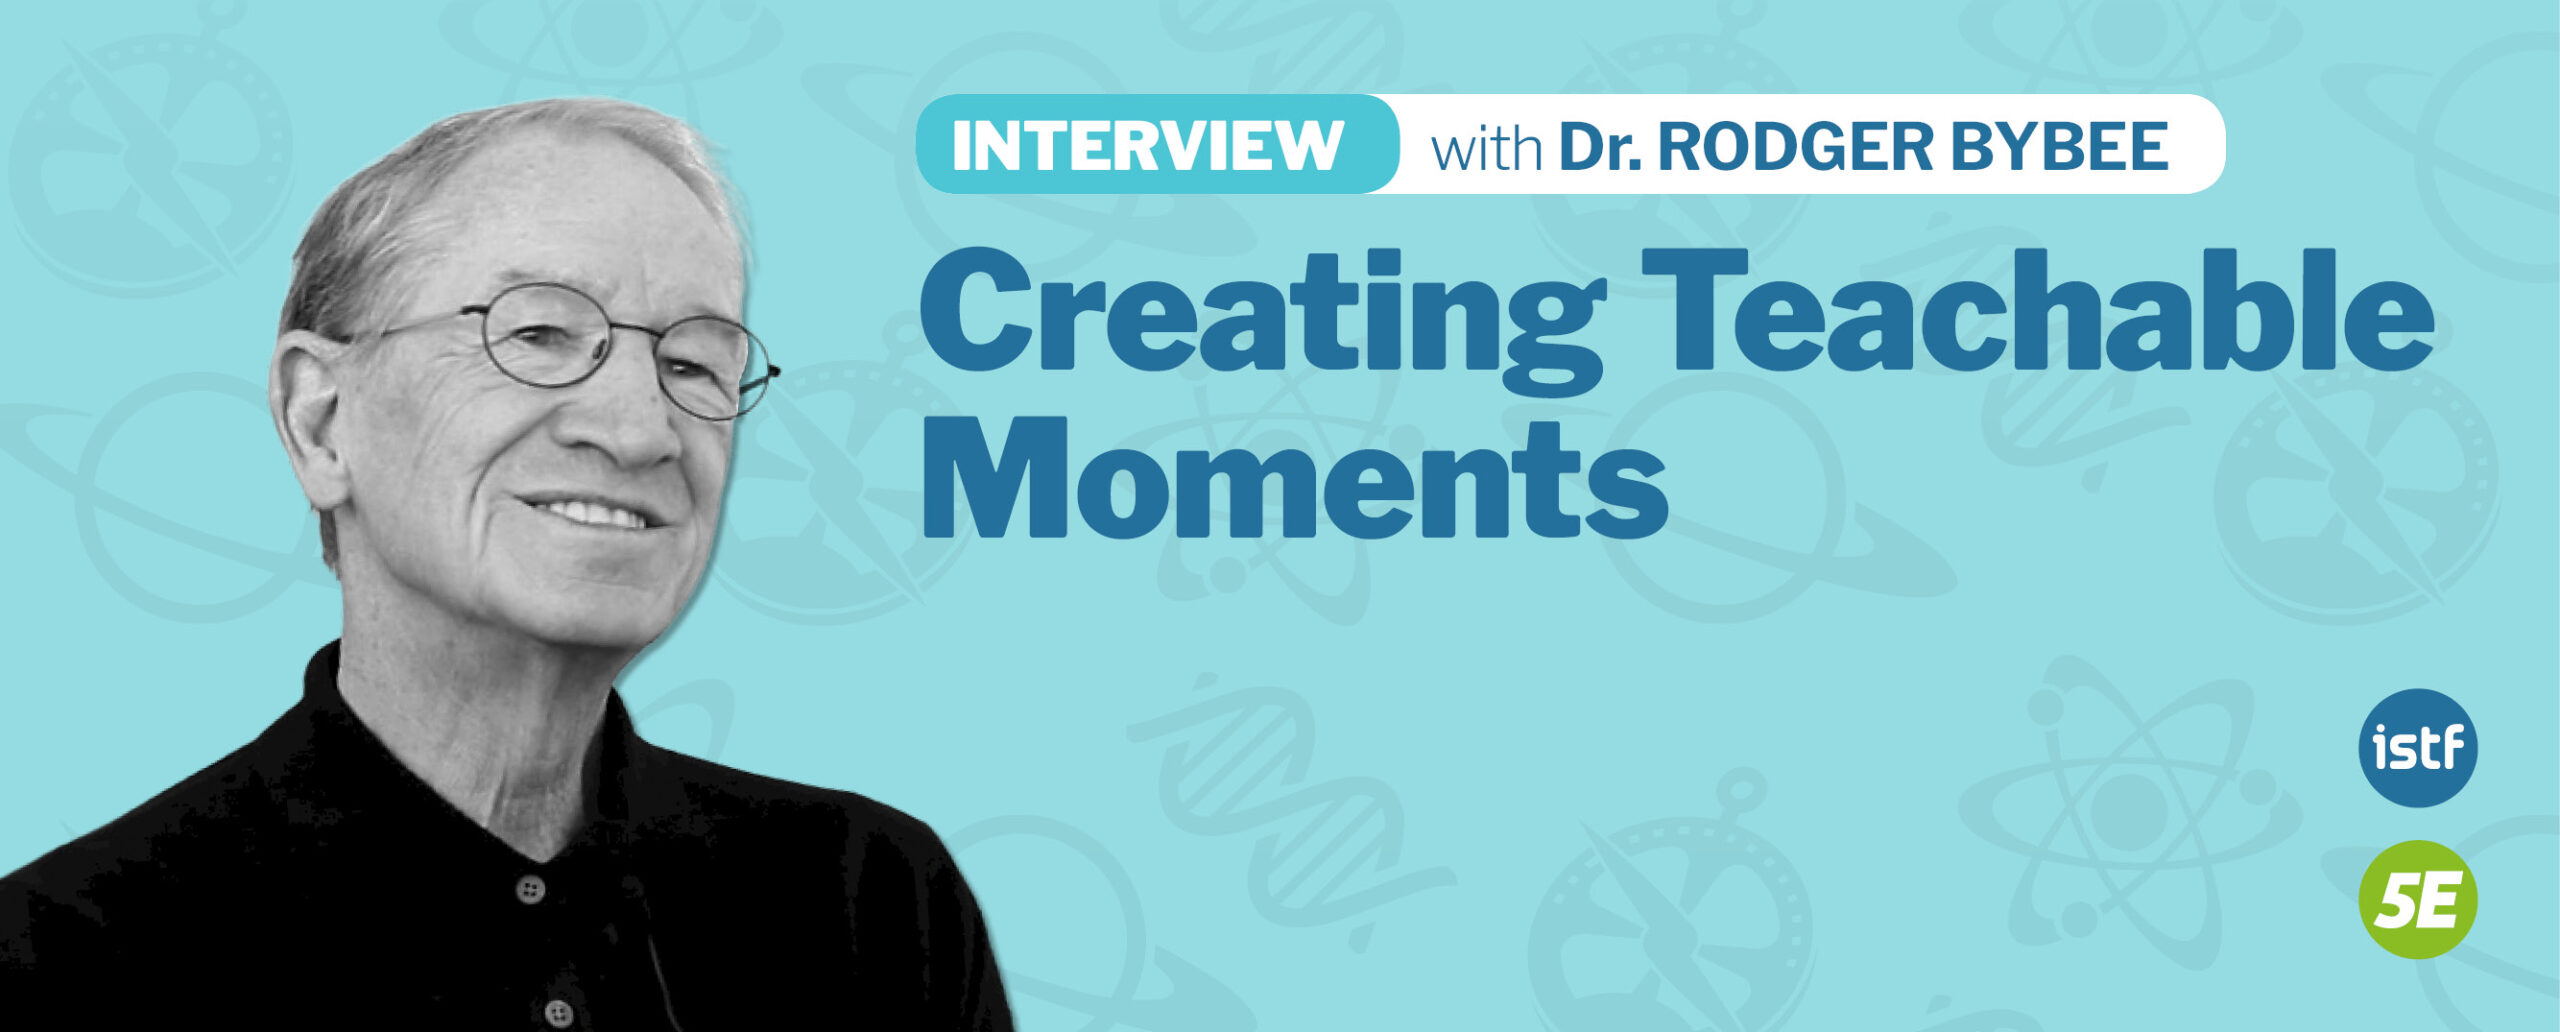 An interview with Dr. Rodger Bybee